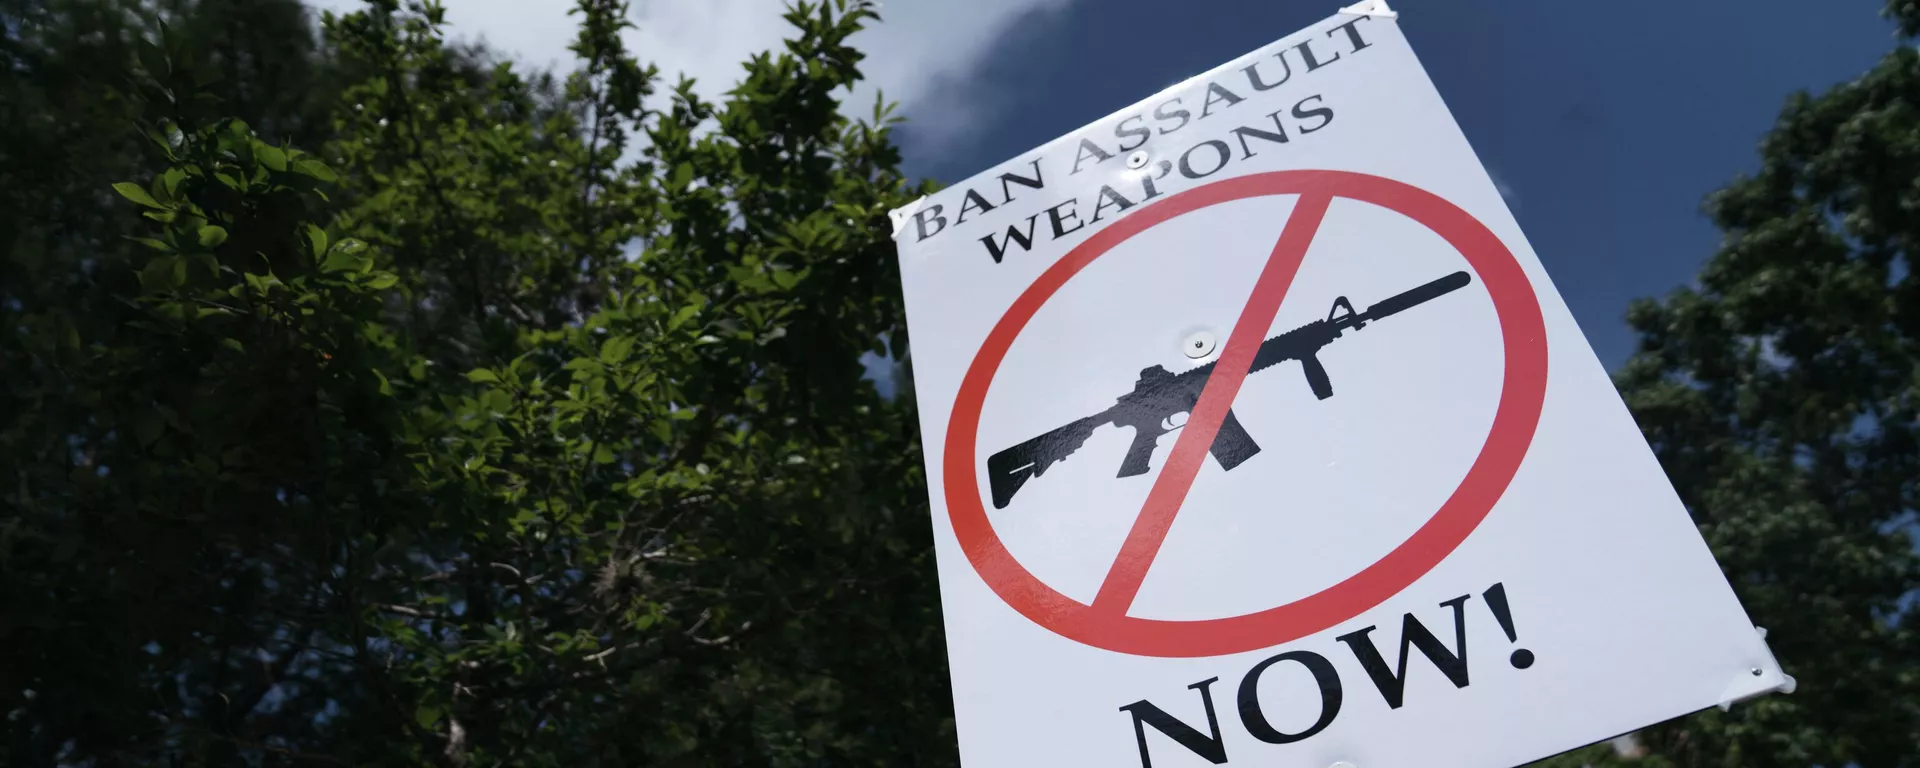 HOUSTON, TX - MAY 27: A gun control advocate holds a sign during a protest across from the National Rifle Association Annual Meeting at the George R. Brown Convention Center, on May 27, 2022 in Houston, Texas.  - Sputnik International, 1920, 29.06.2022